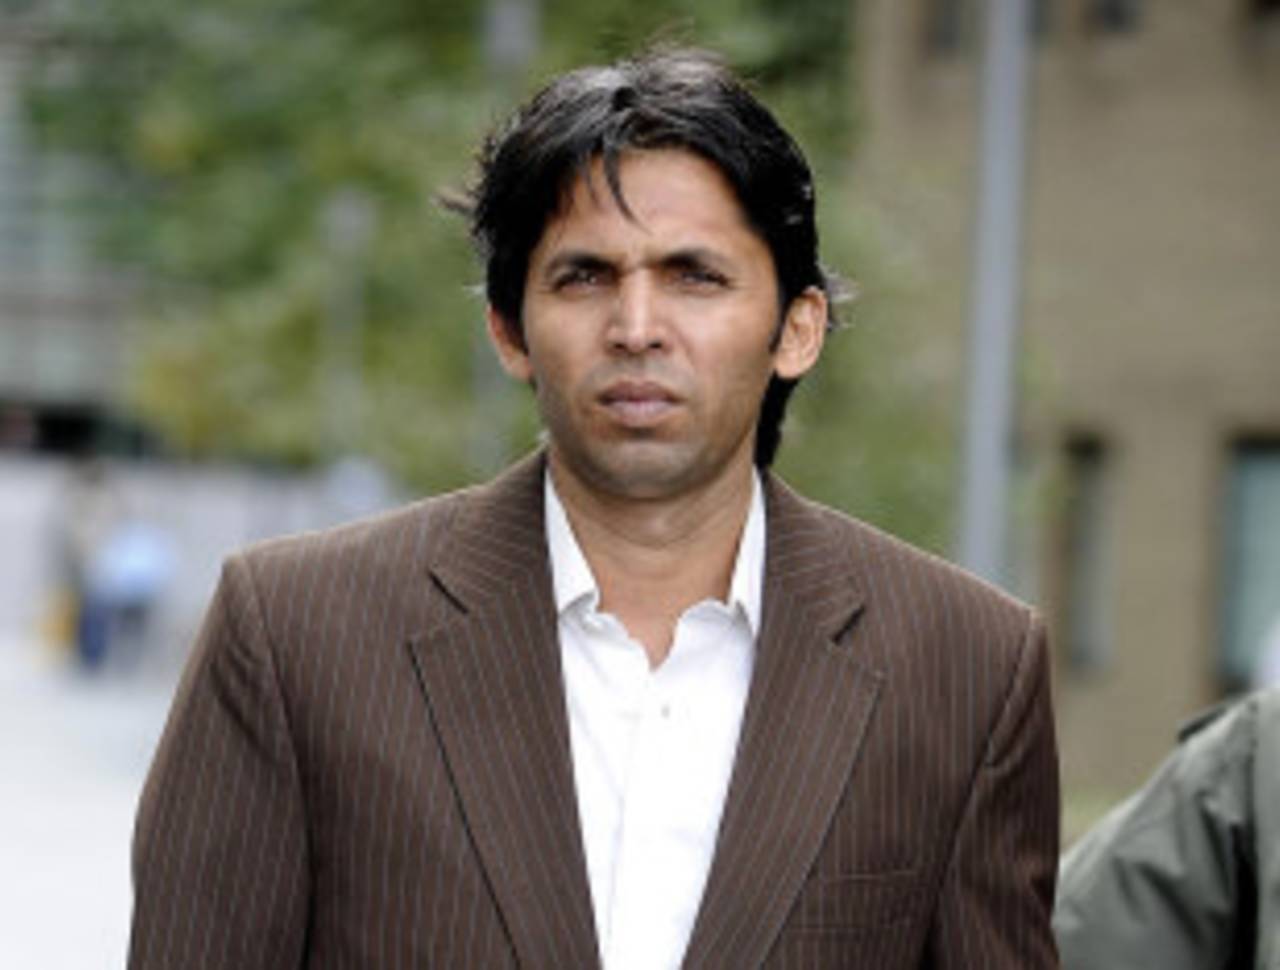 Mohammad Asif outside court ahead of the second day of his trial, Southwark, October 5, 2011